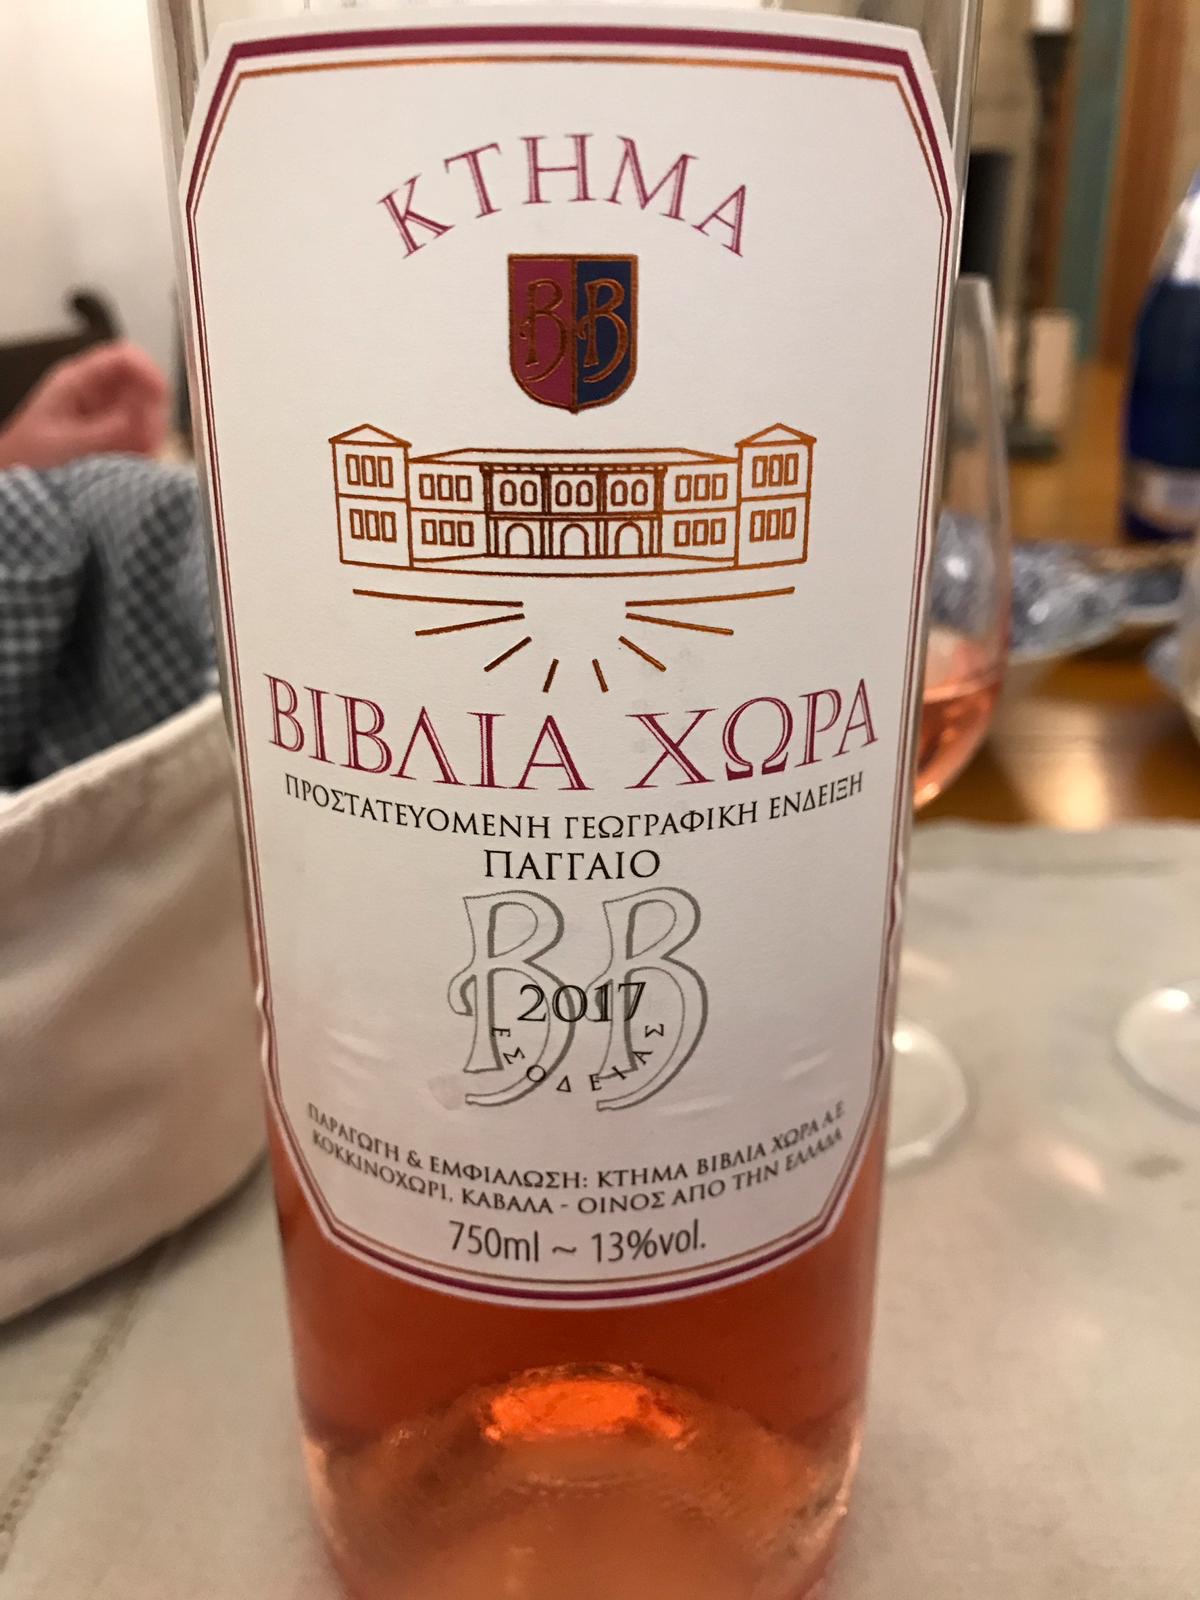 A rose wine from Kavala, Northern Greece